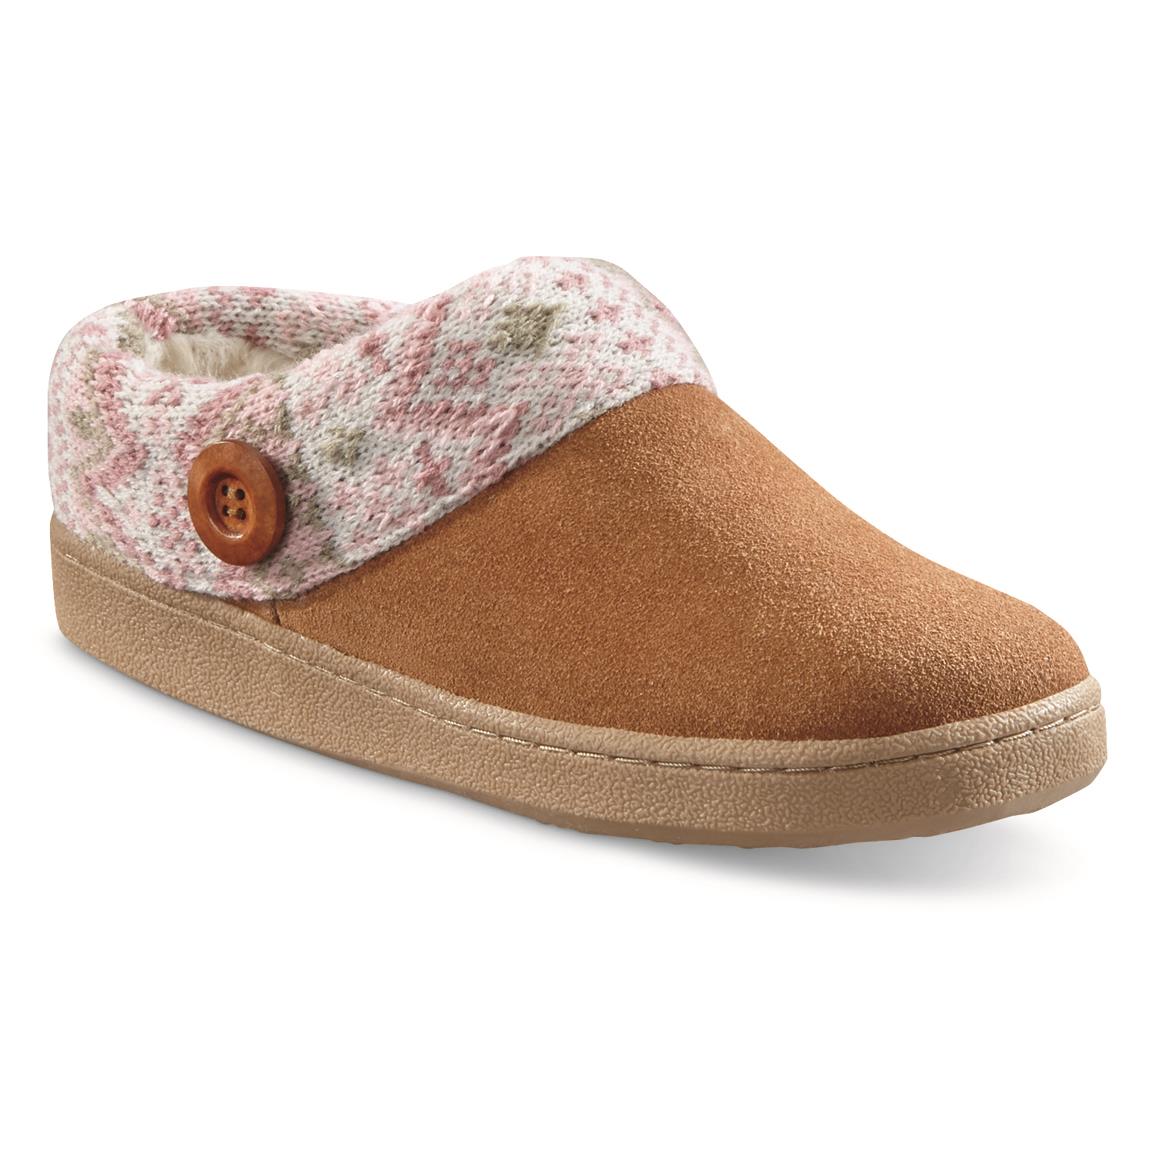 Guide Gear Women's Suede Clog Slippers with Sweater Button Collar, Cognac